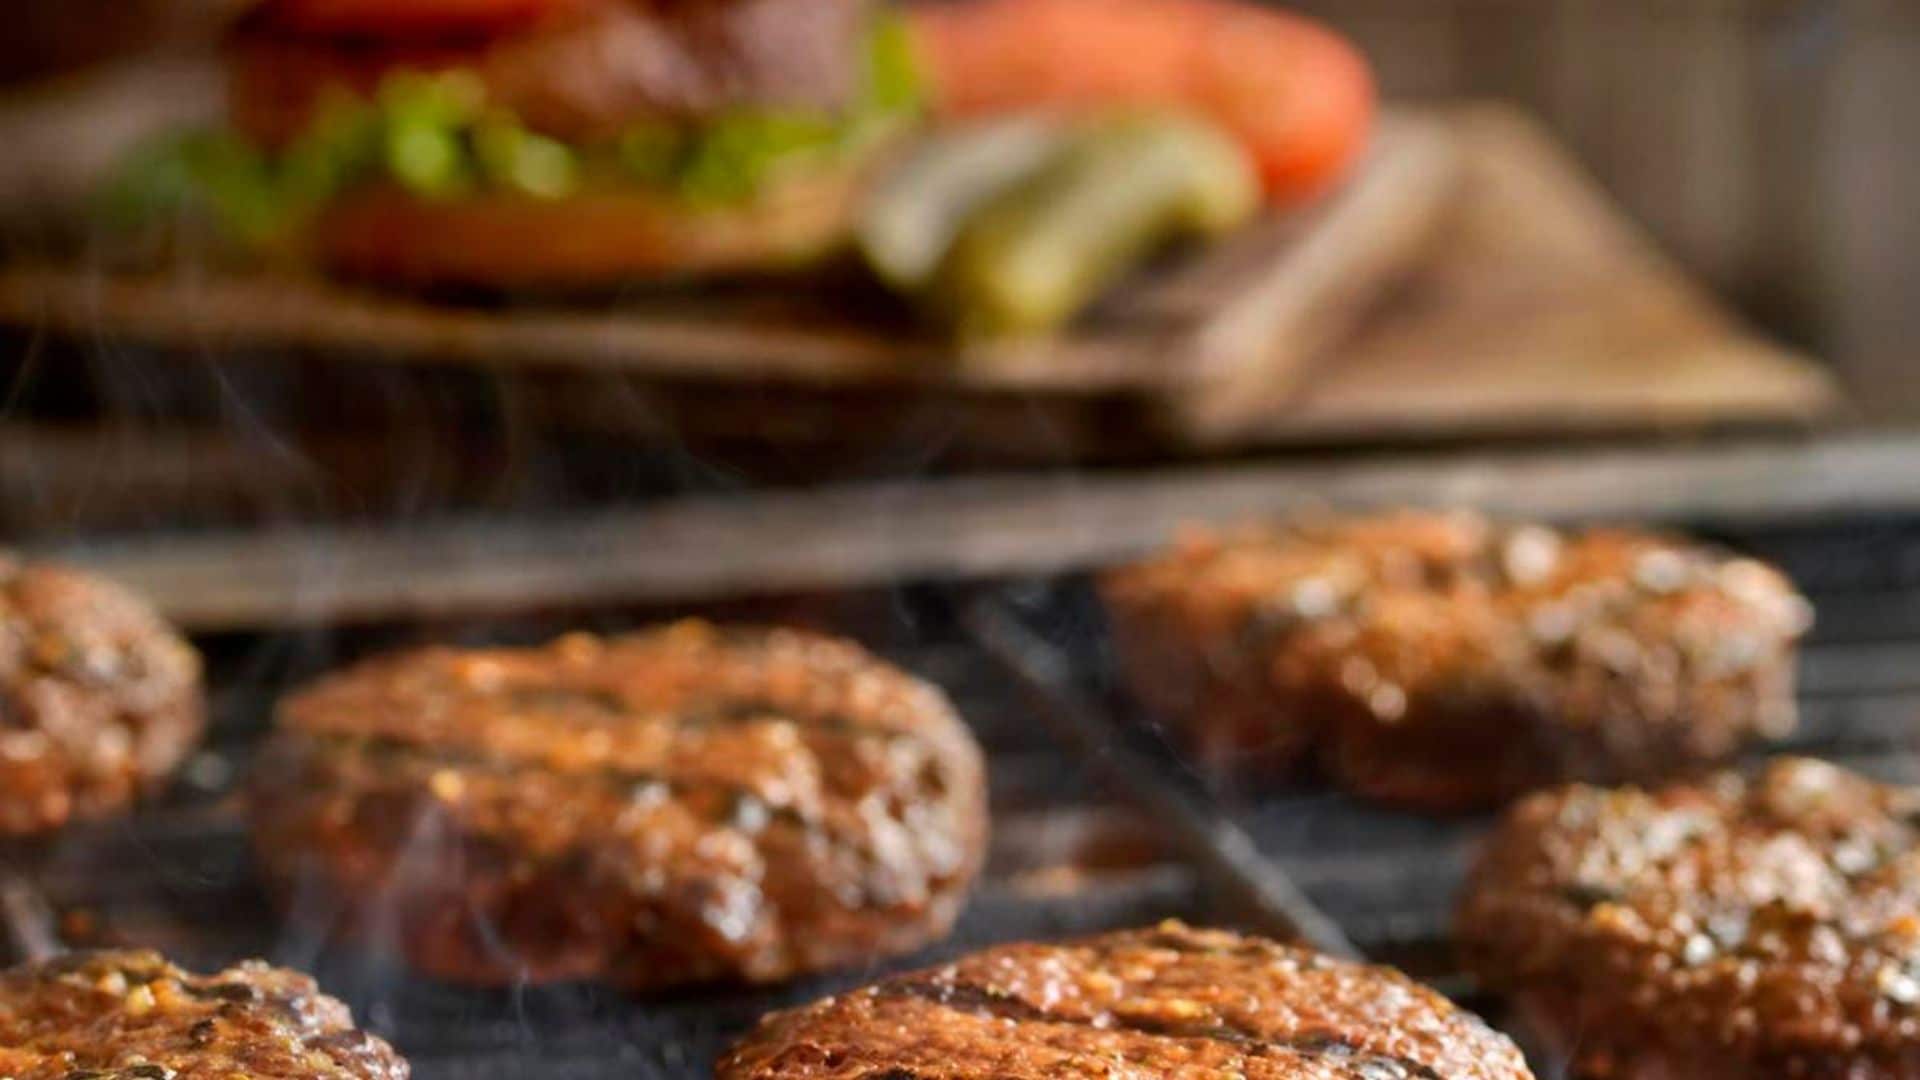 How to grill hamburgers